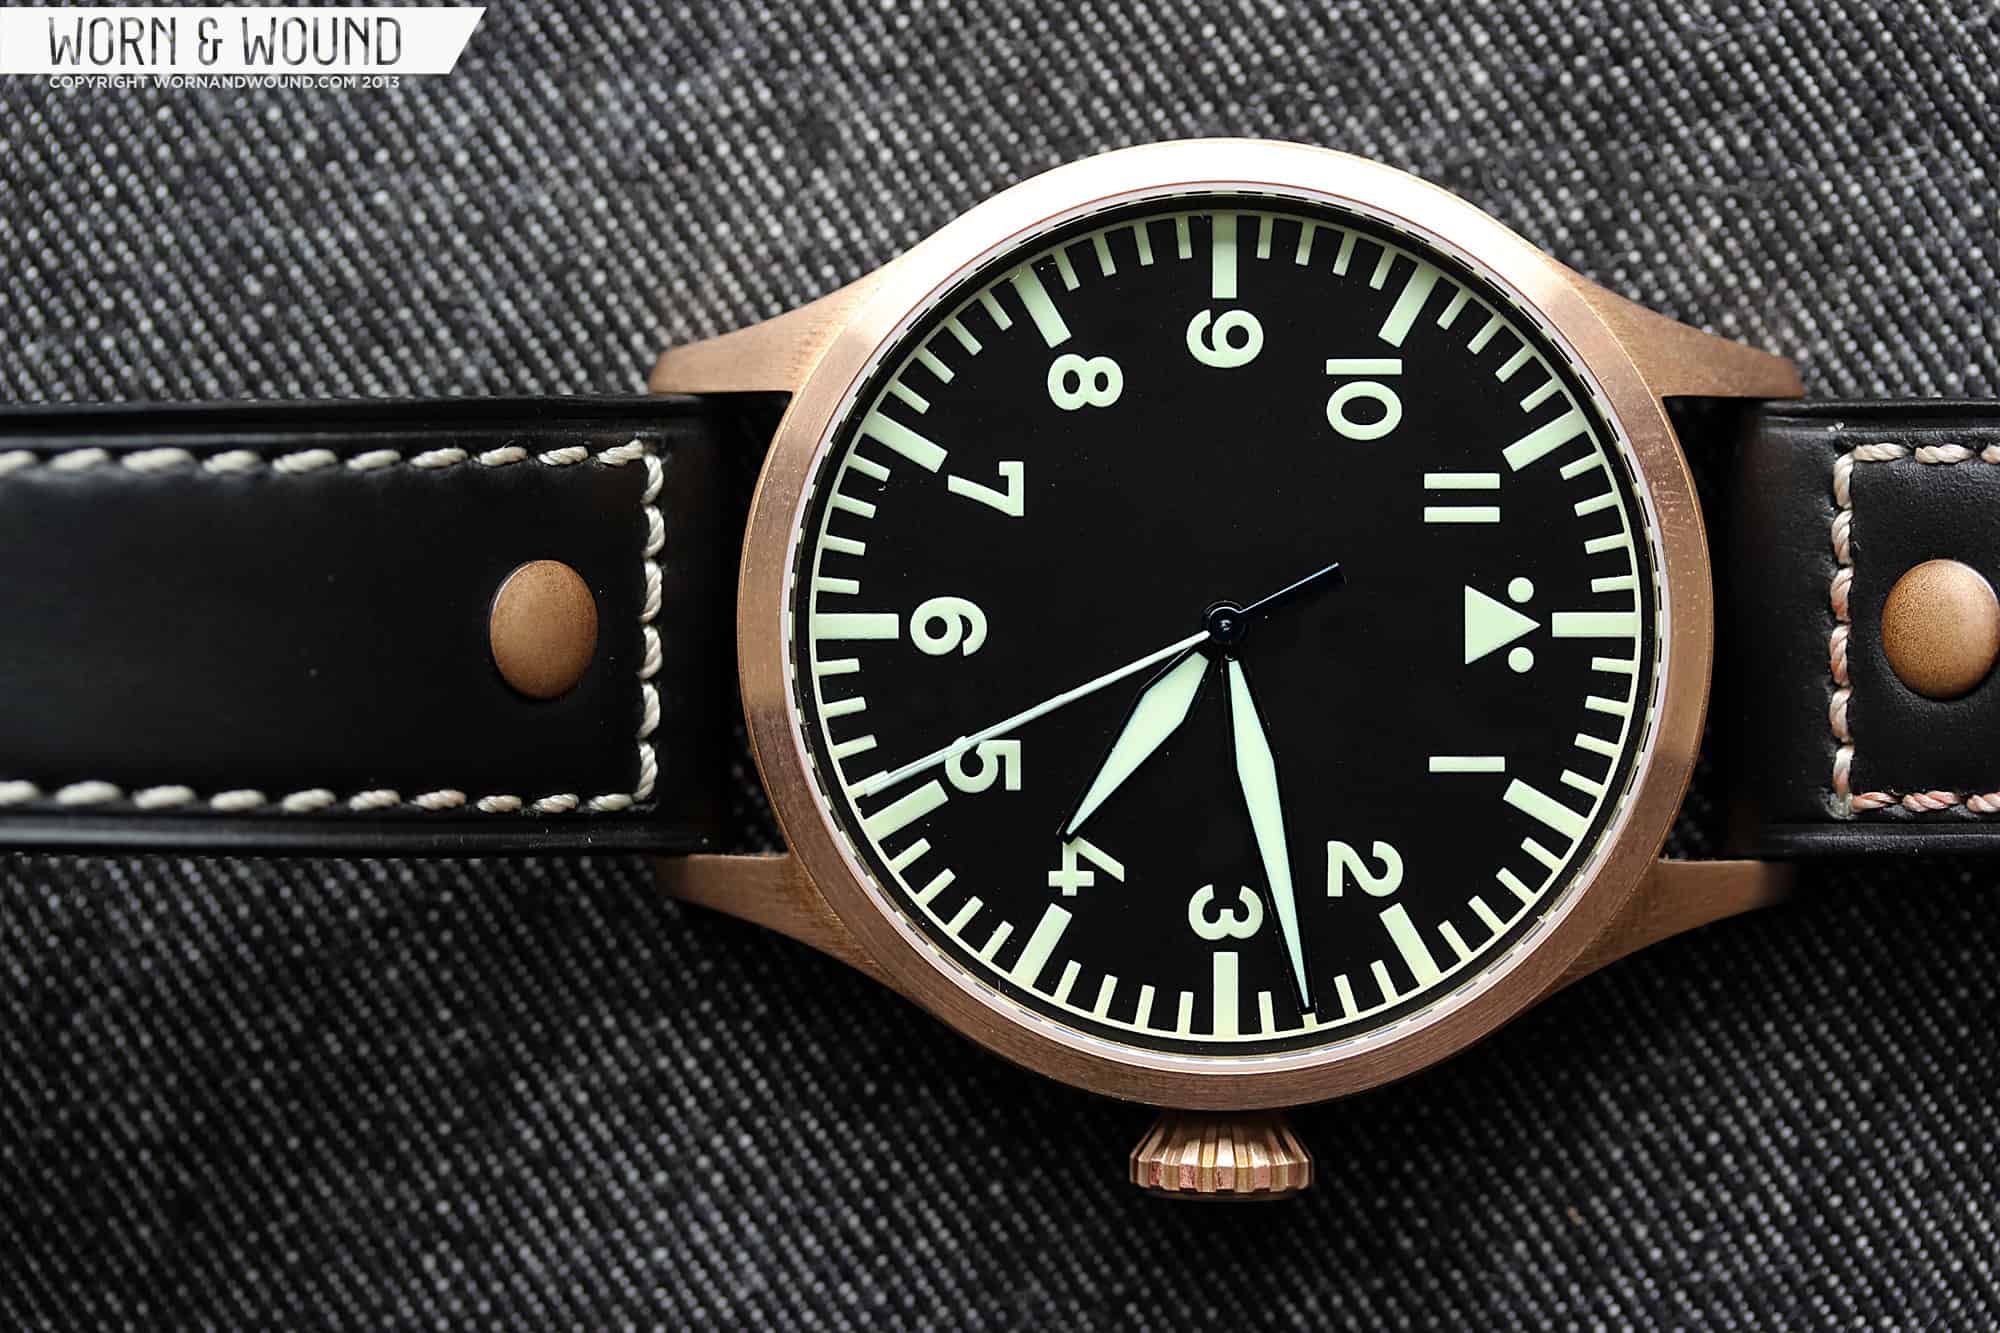 Archimede Pilot 42H Bronze Review - Worn & Wound